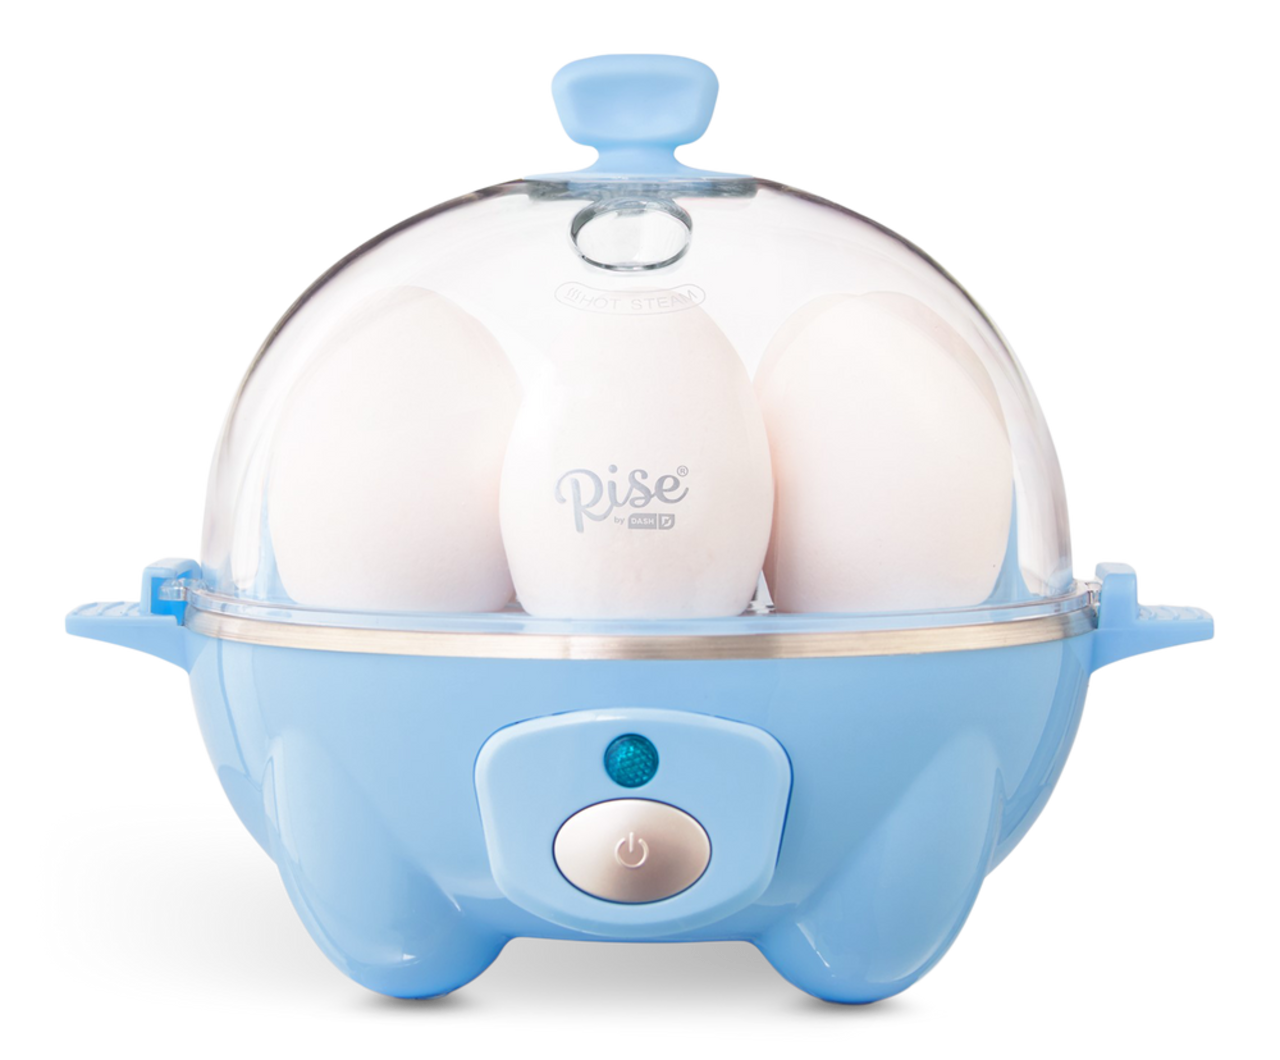 Rise by Dash Black Egg Cooker